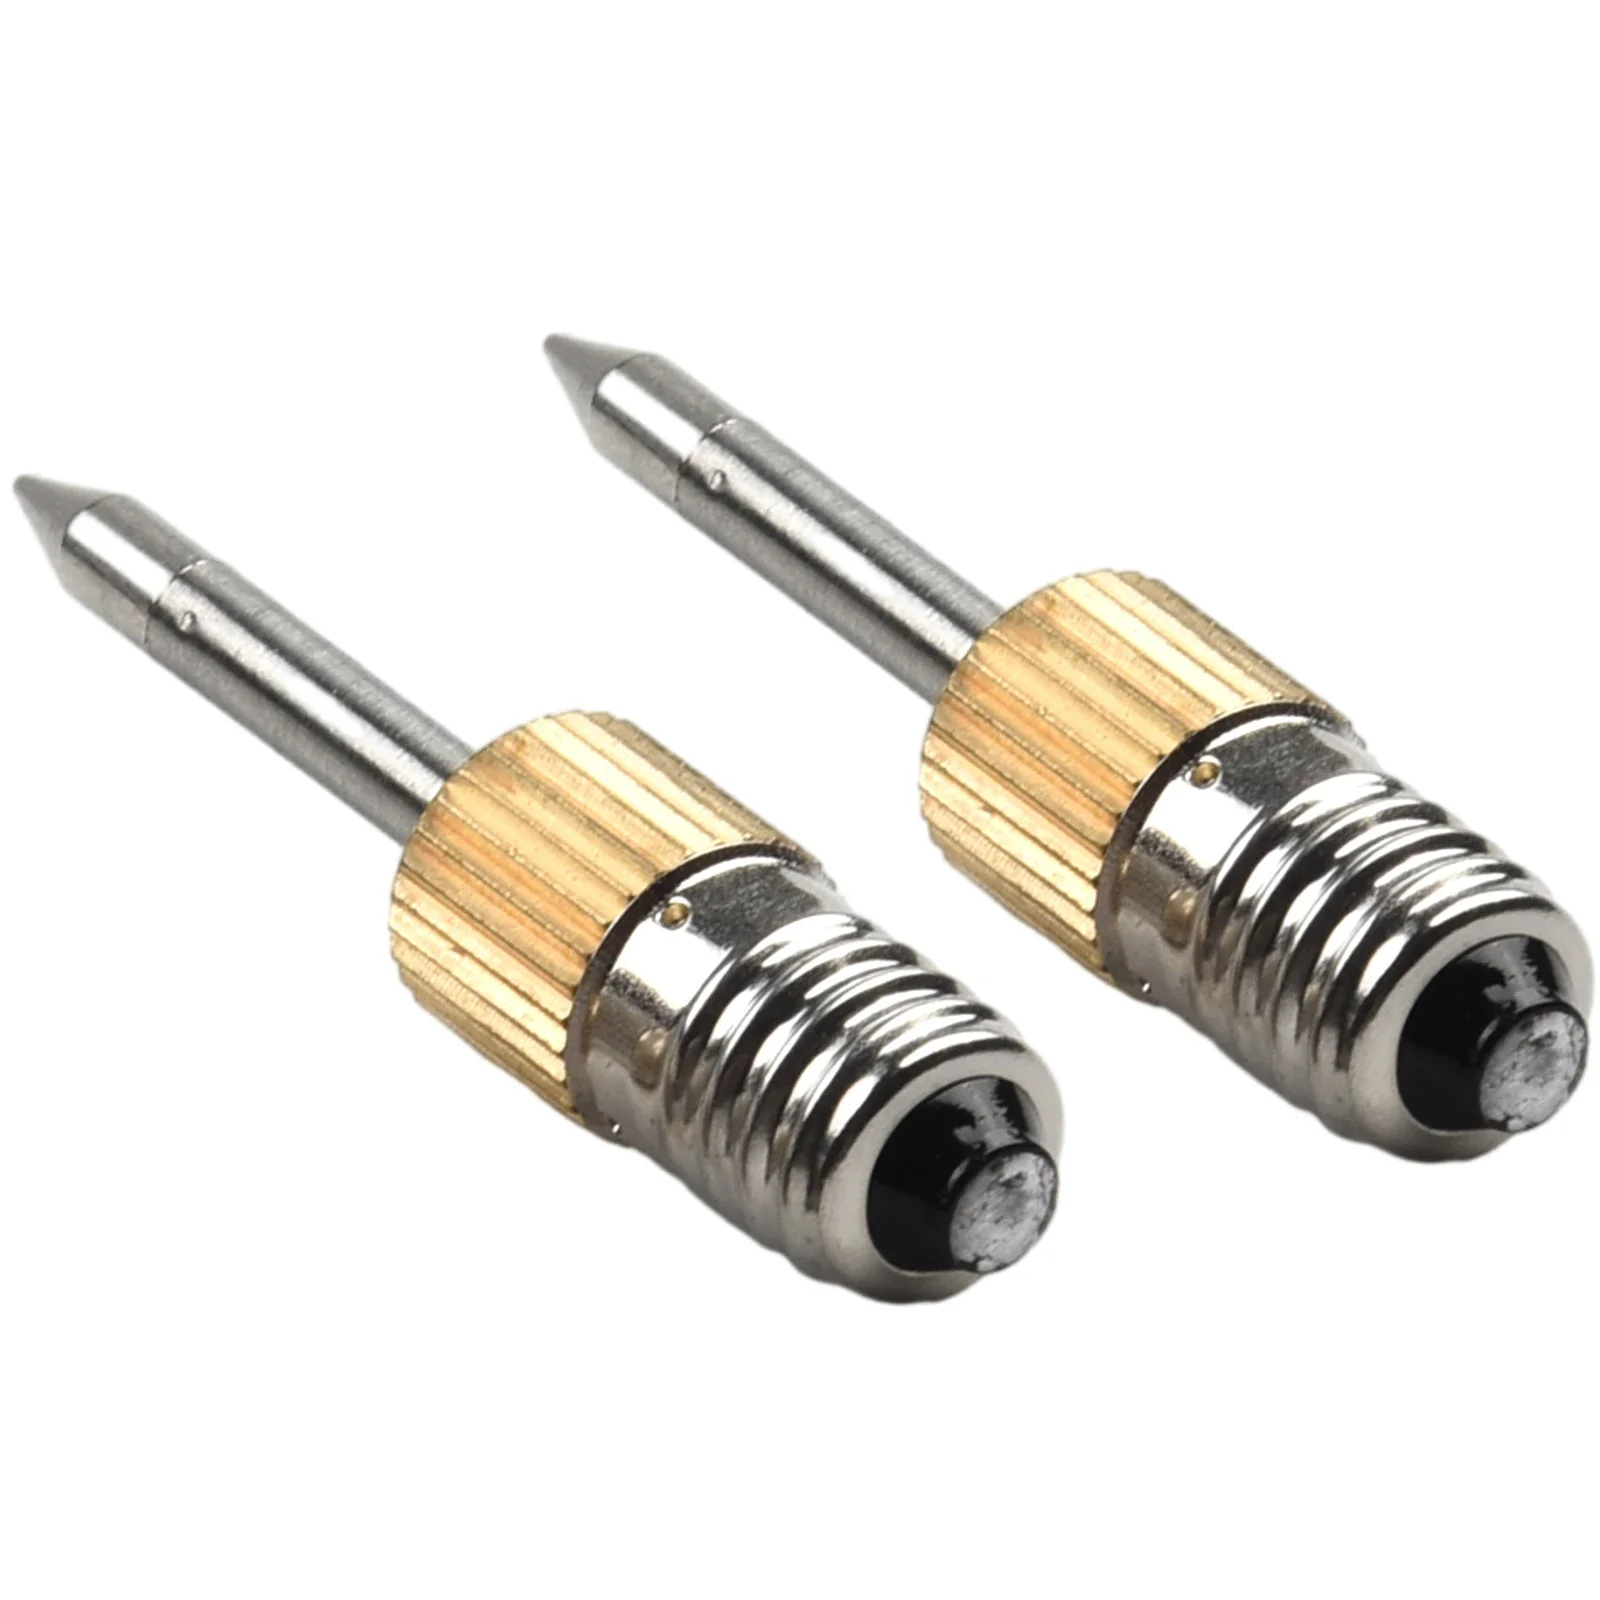 

With Sponge Soldering Iron Tip Nozzle Wire Steel Welding Head 50 Mm Accessories E10 Interface For Spot High Quality